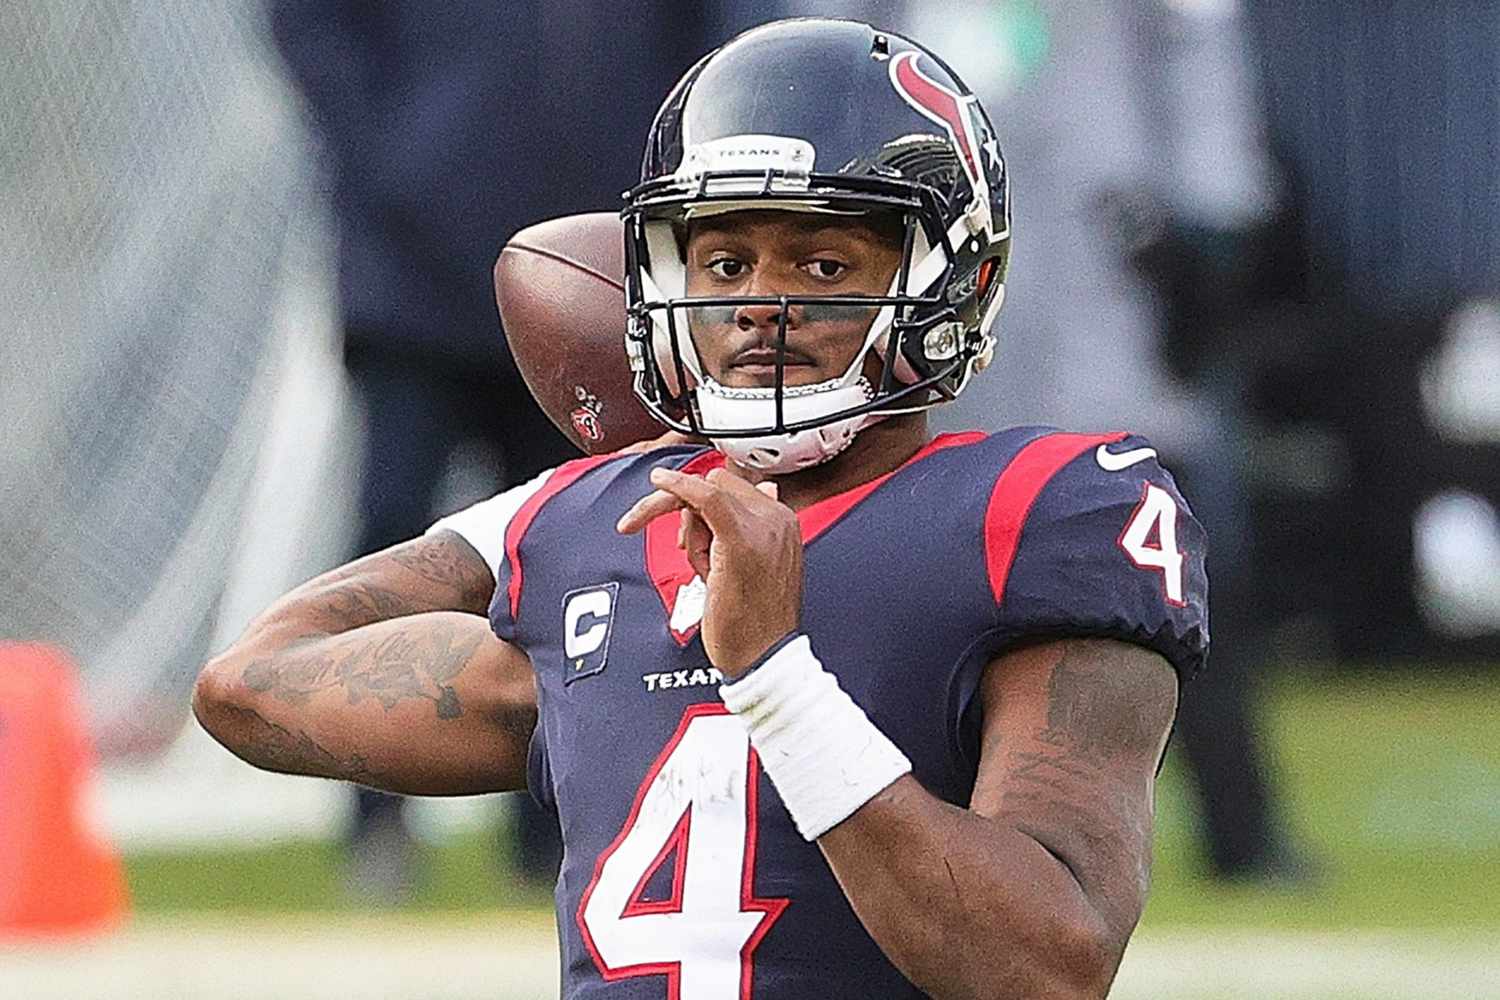 Deshaun Watson #4 of the Houston Texans passes against the Chicago Bears at Soldier Field on December 13, 2020 in Chicago, Illinois.